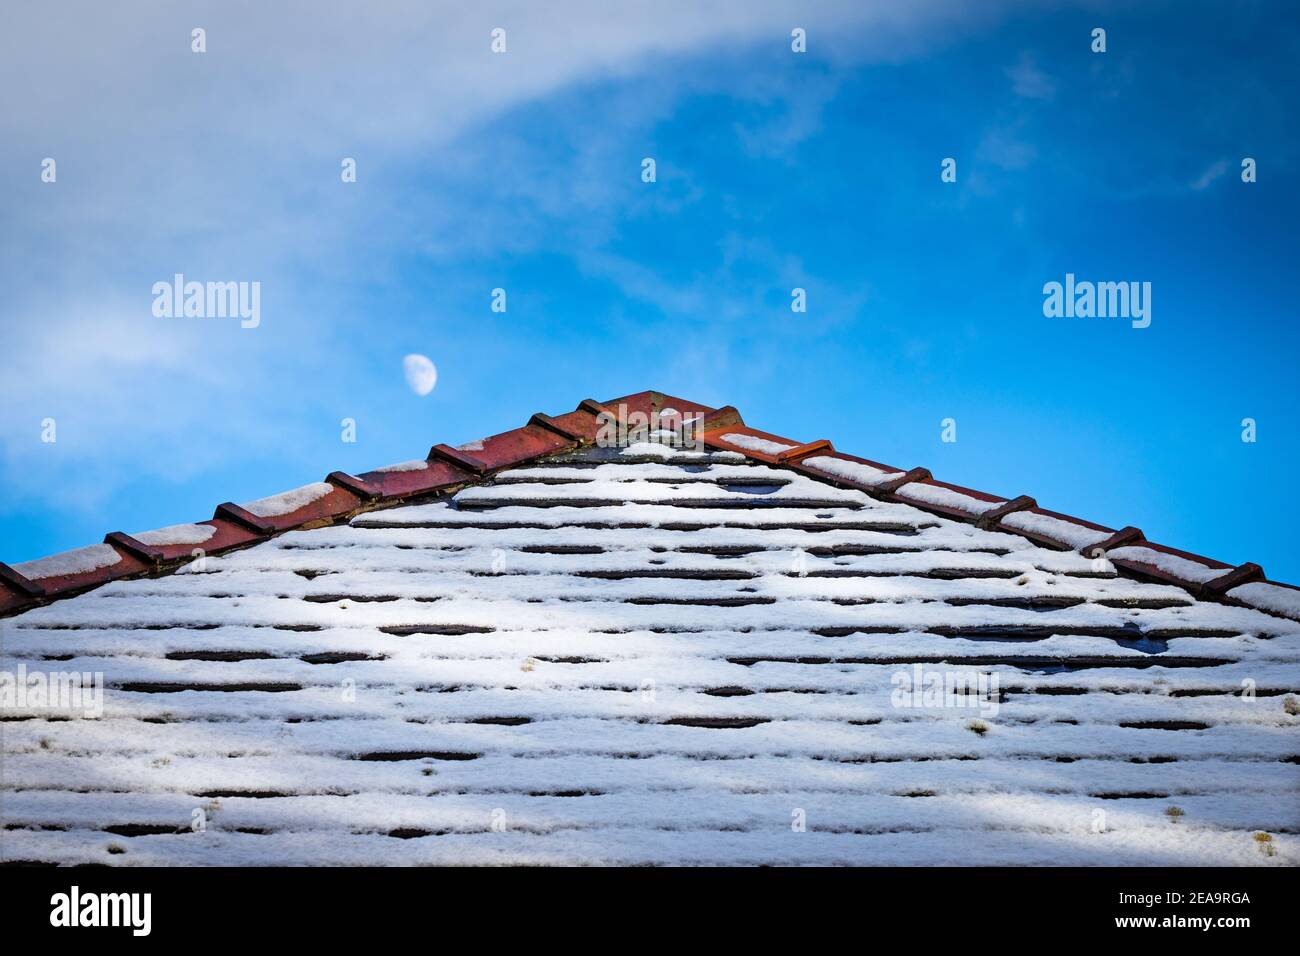 Graphic image of snowy rooftop with the moon behind taken early morning. Stock Photo